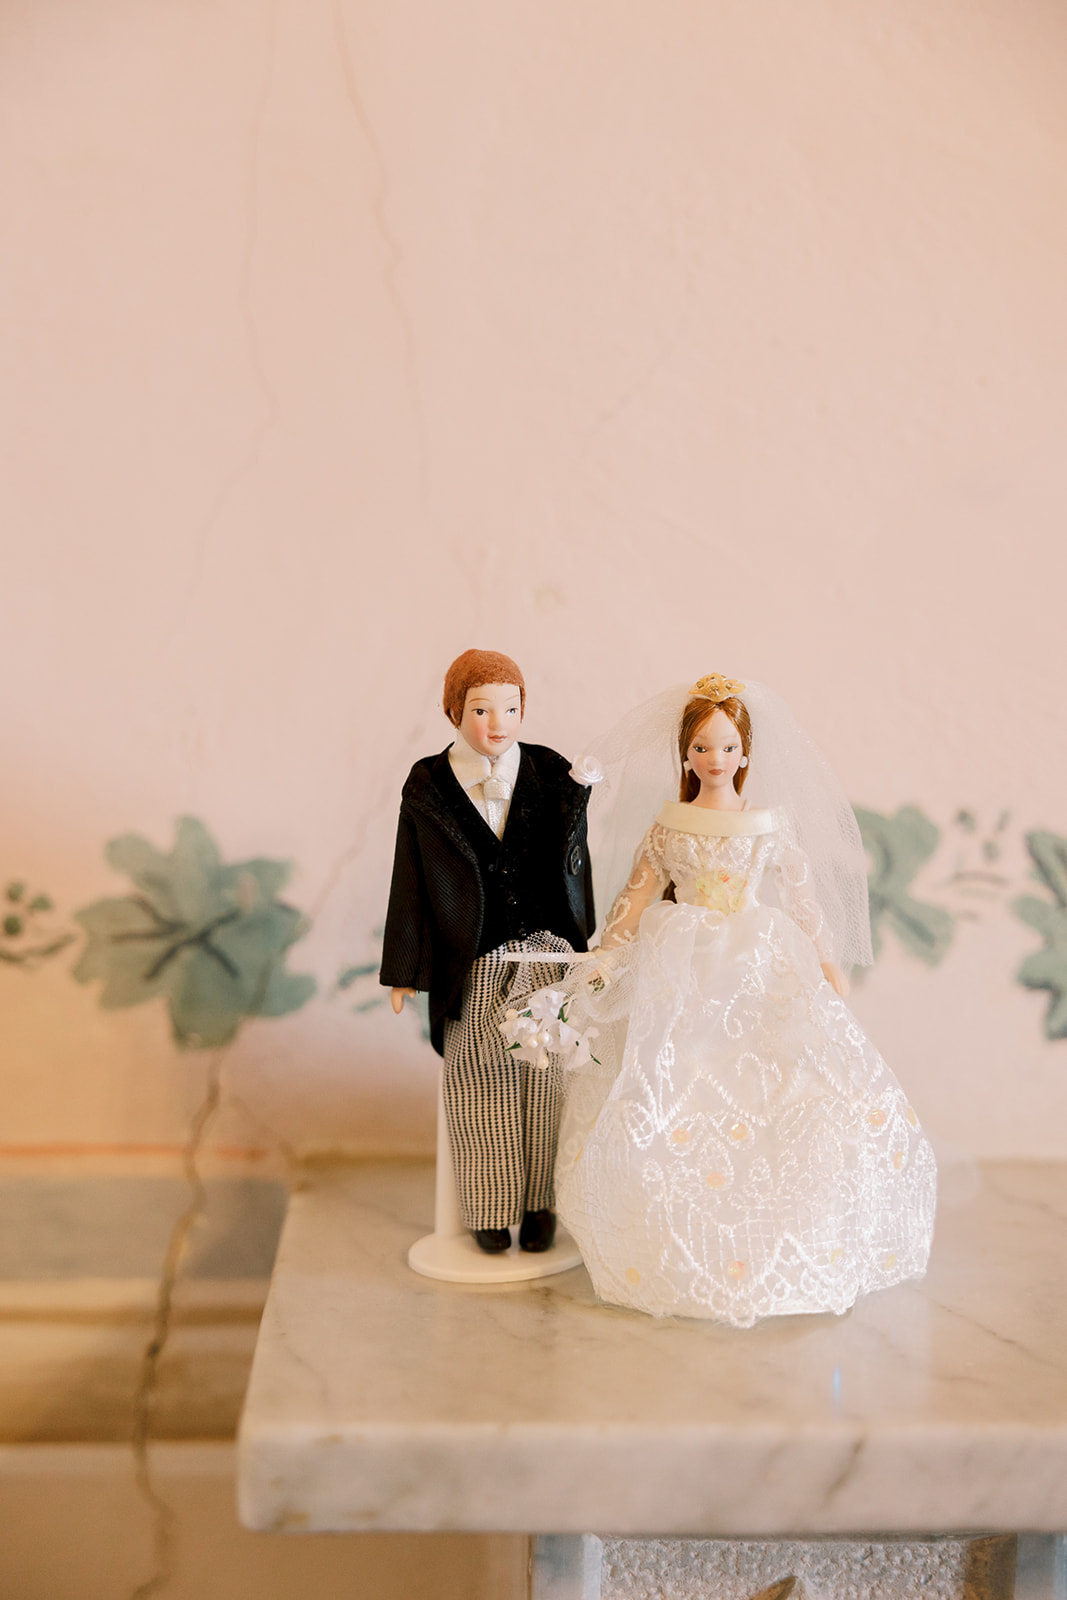 wedding cake topper of bride and groom